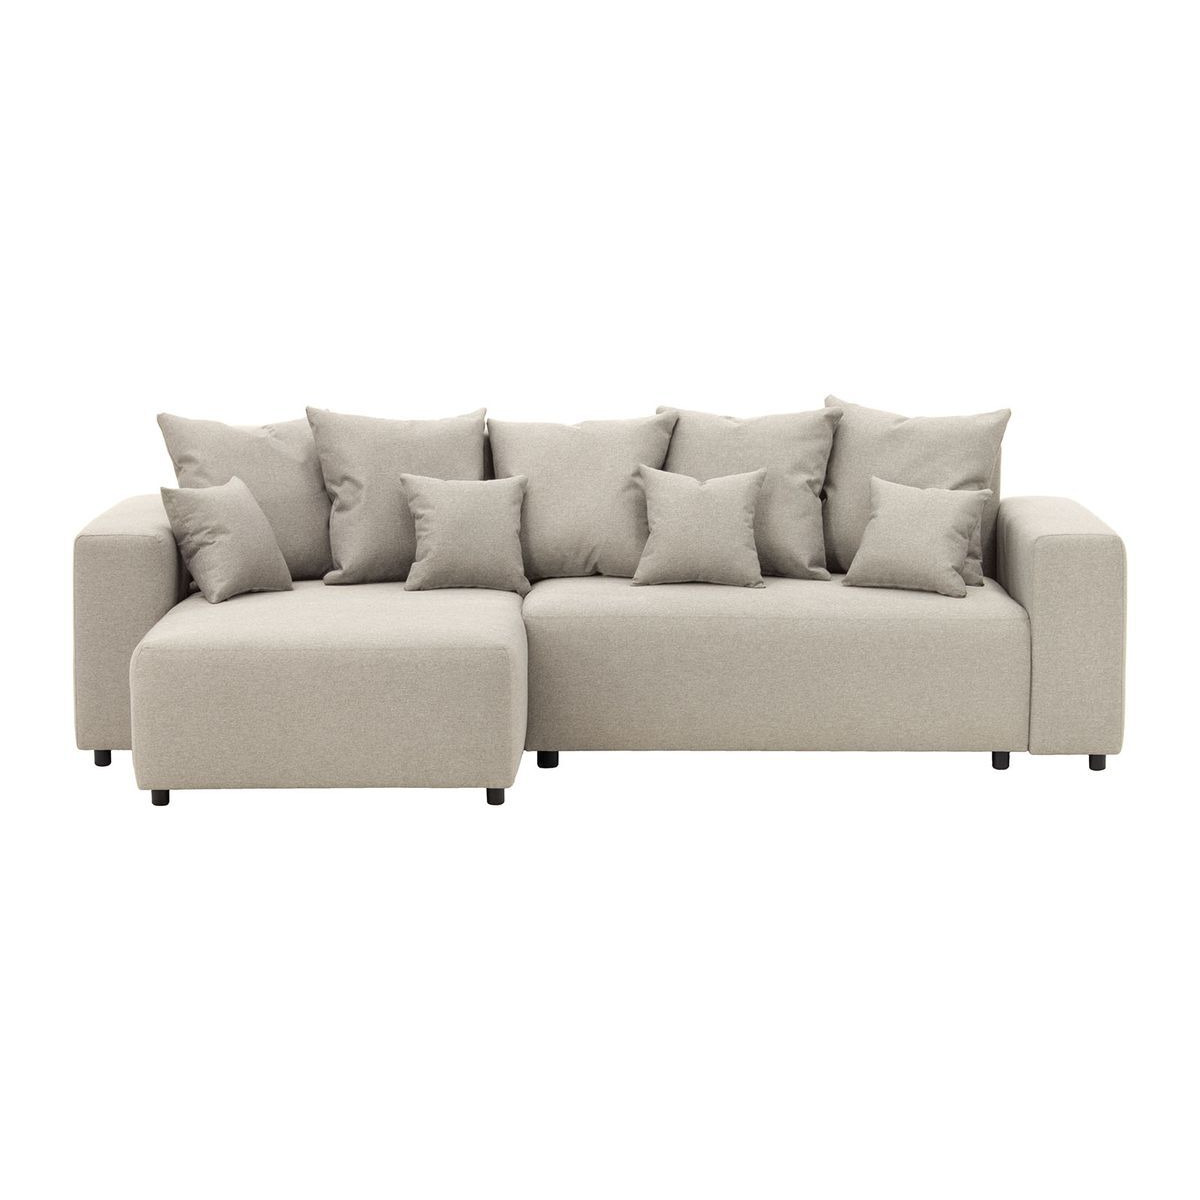 Homely Left Hand Corner Sofa Bed, boucle brown - image 1